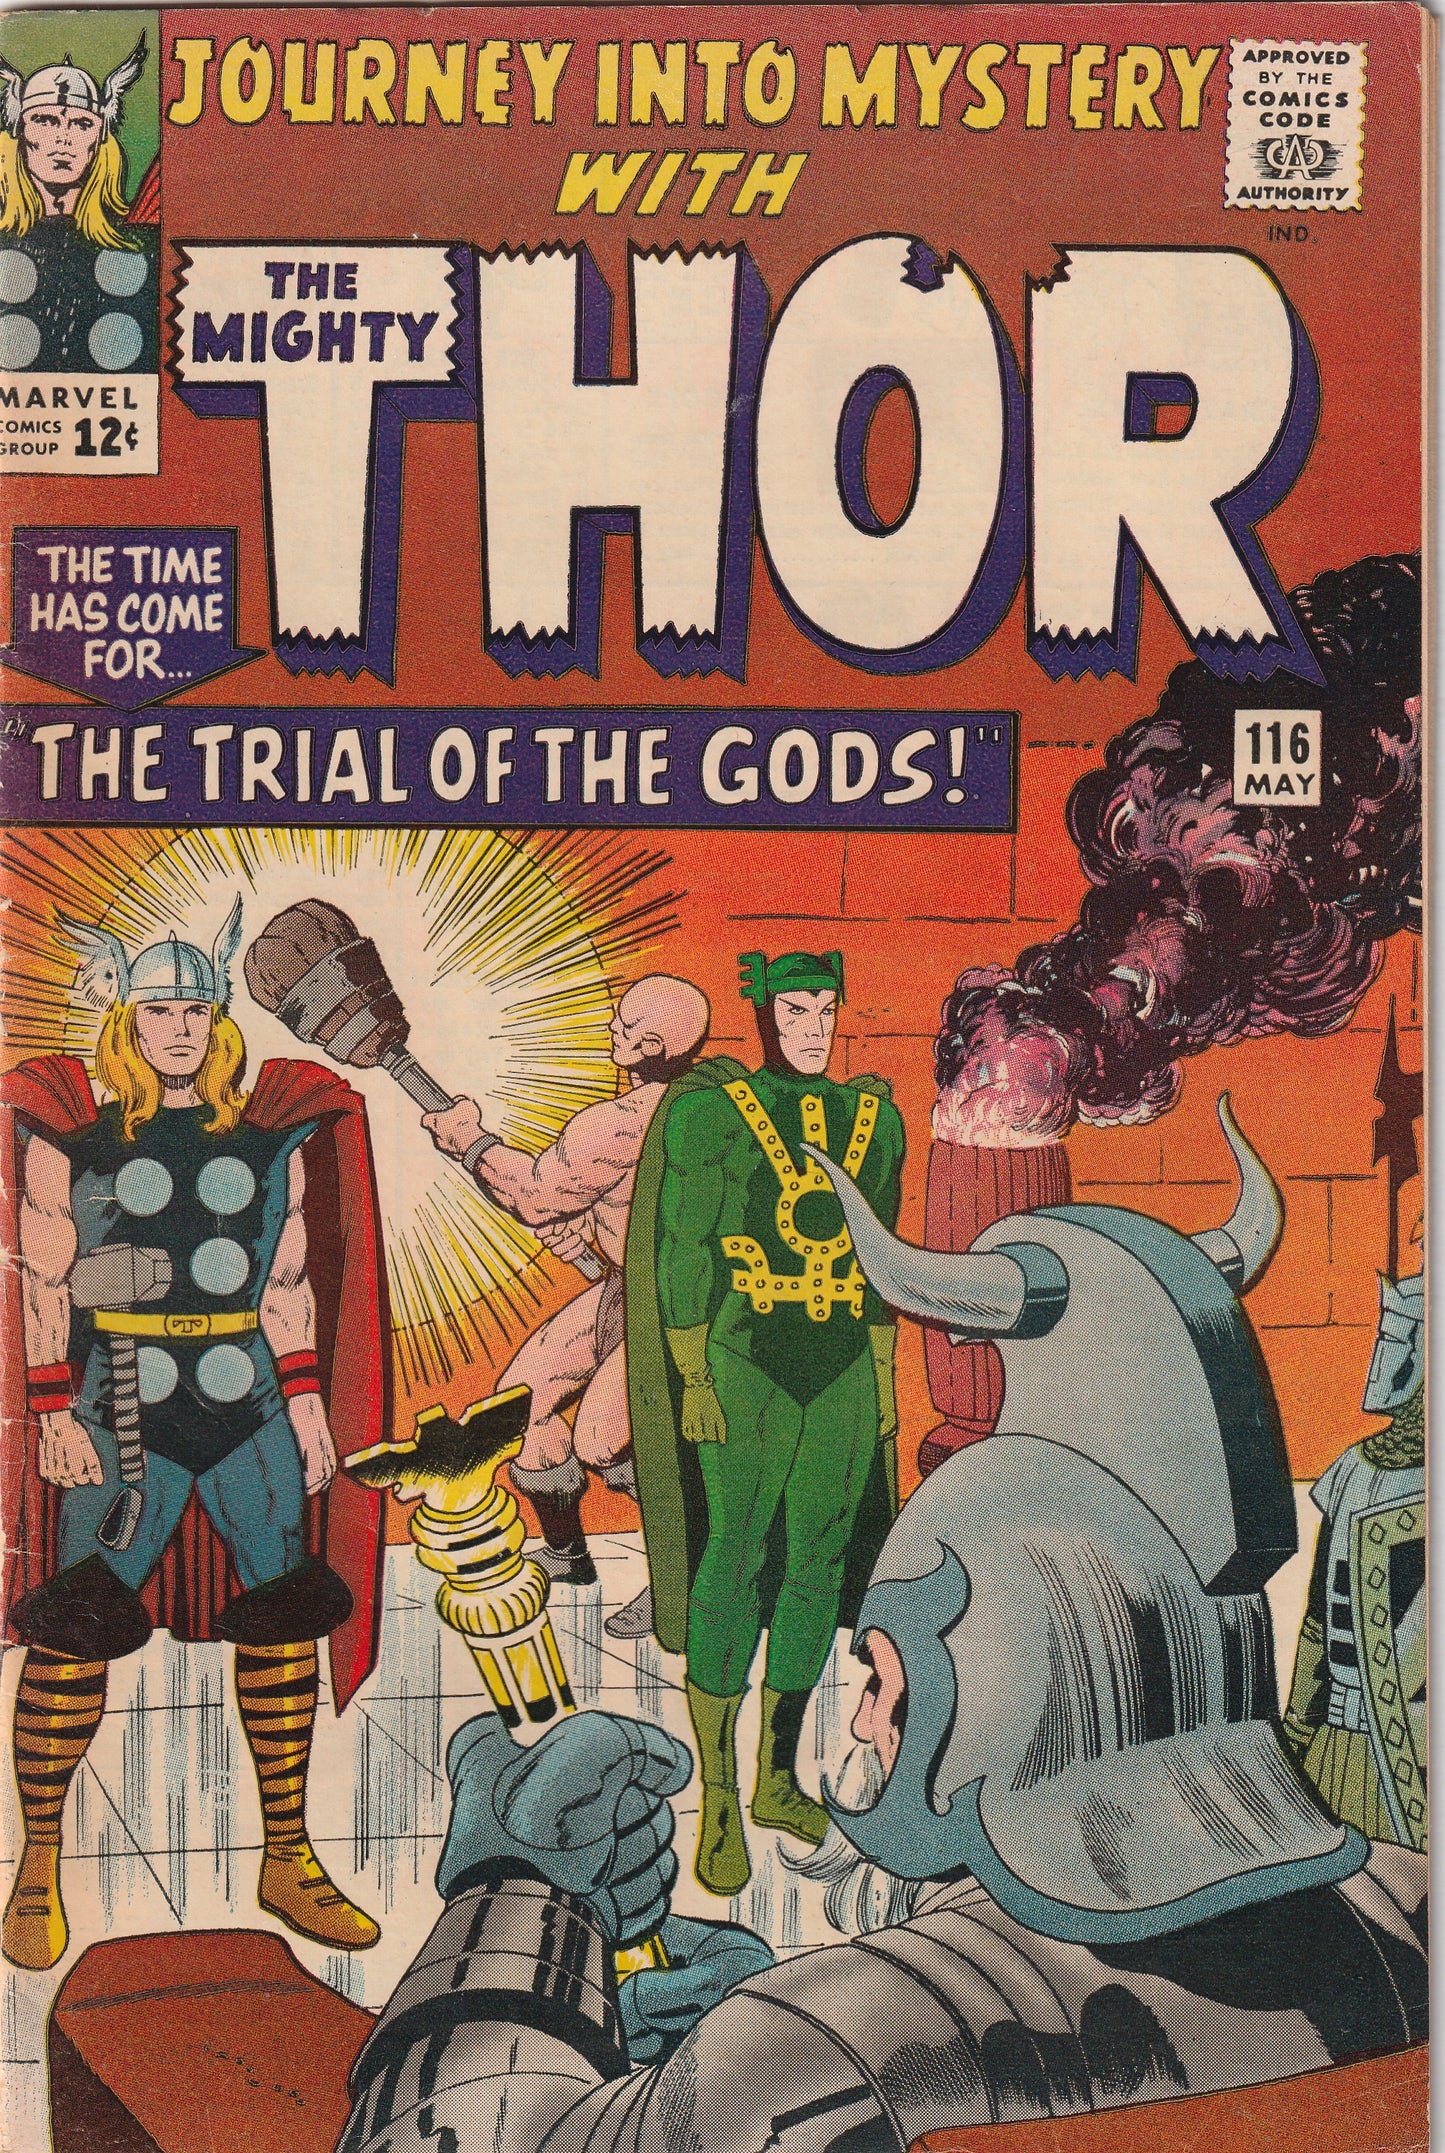 Journey Into Mystery #116 (1965) - With Thor